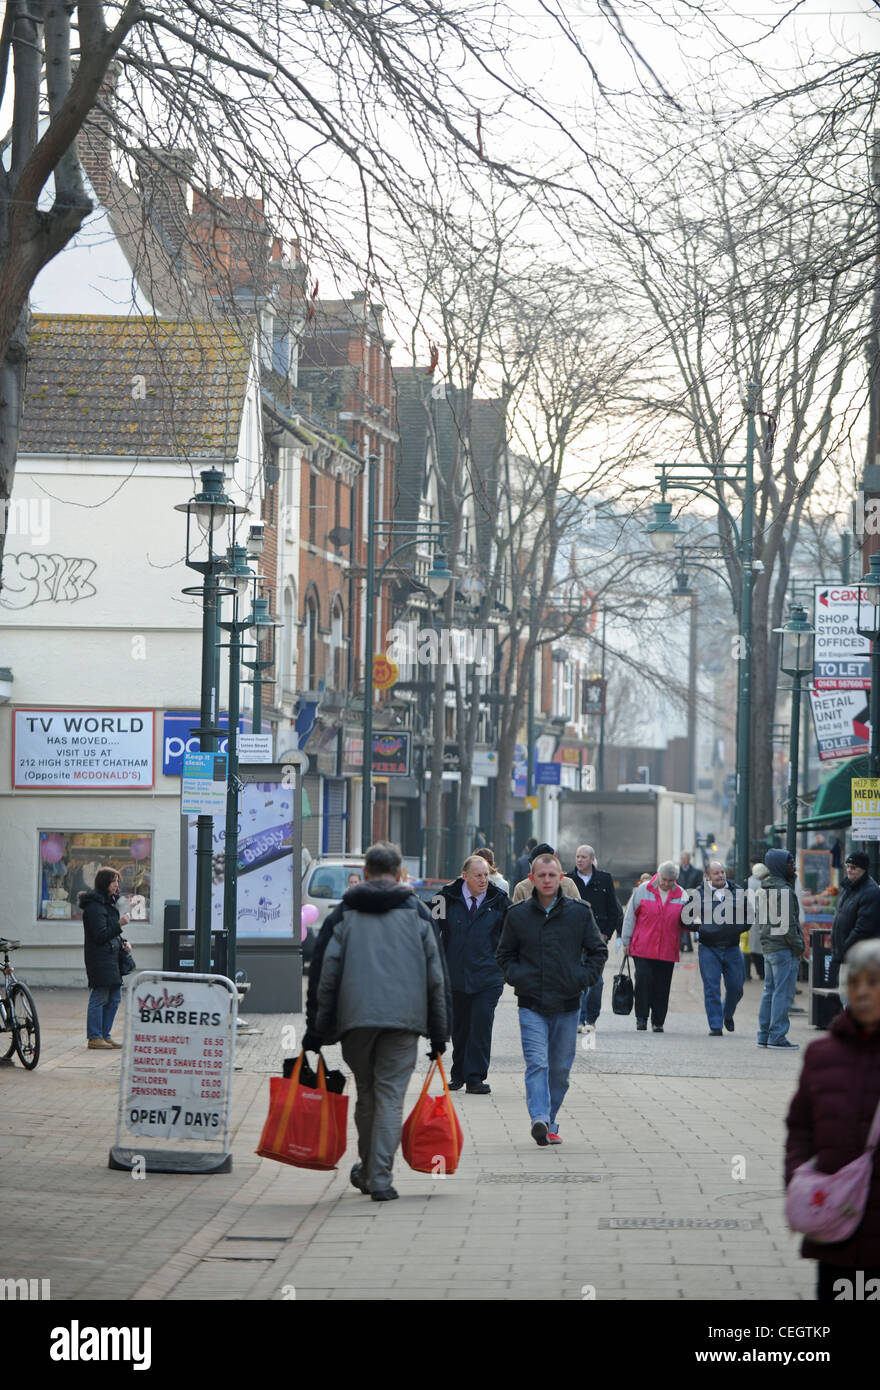 Chatham town centre Kent pedestrinised shopping area UK man carrying shopping bags Stock Photo